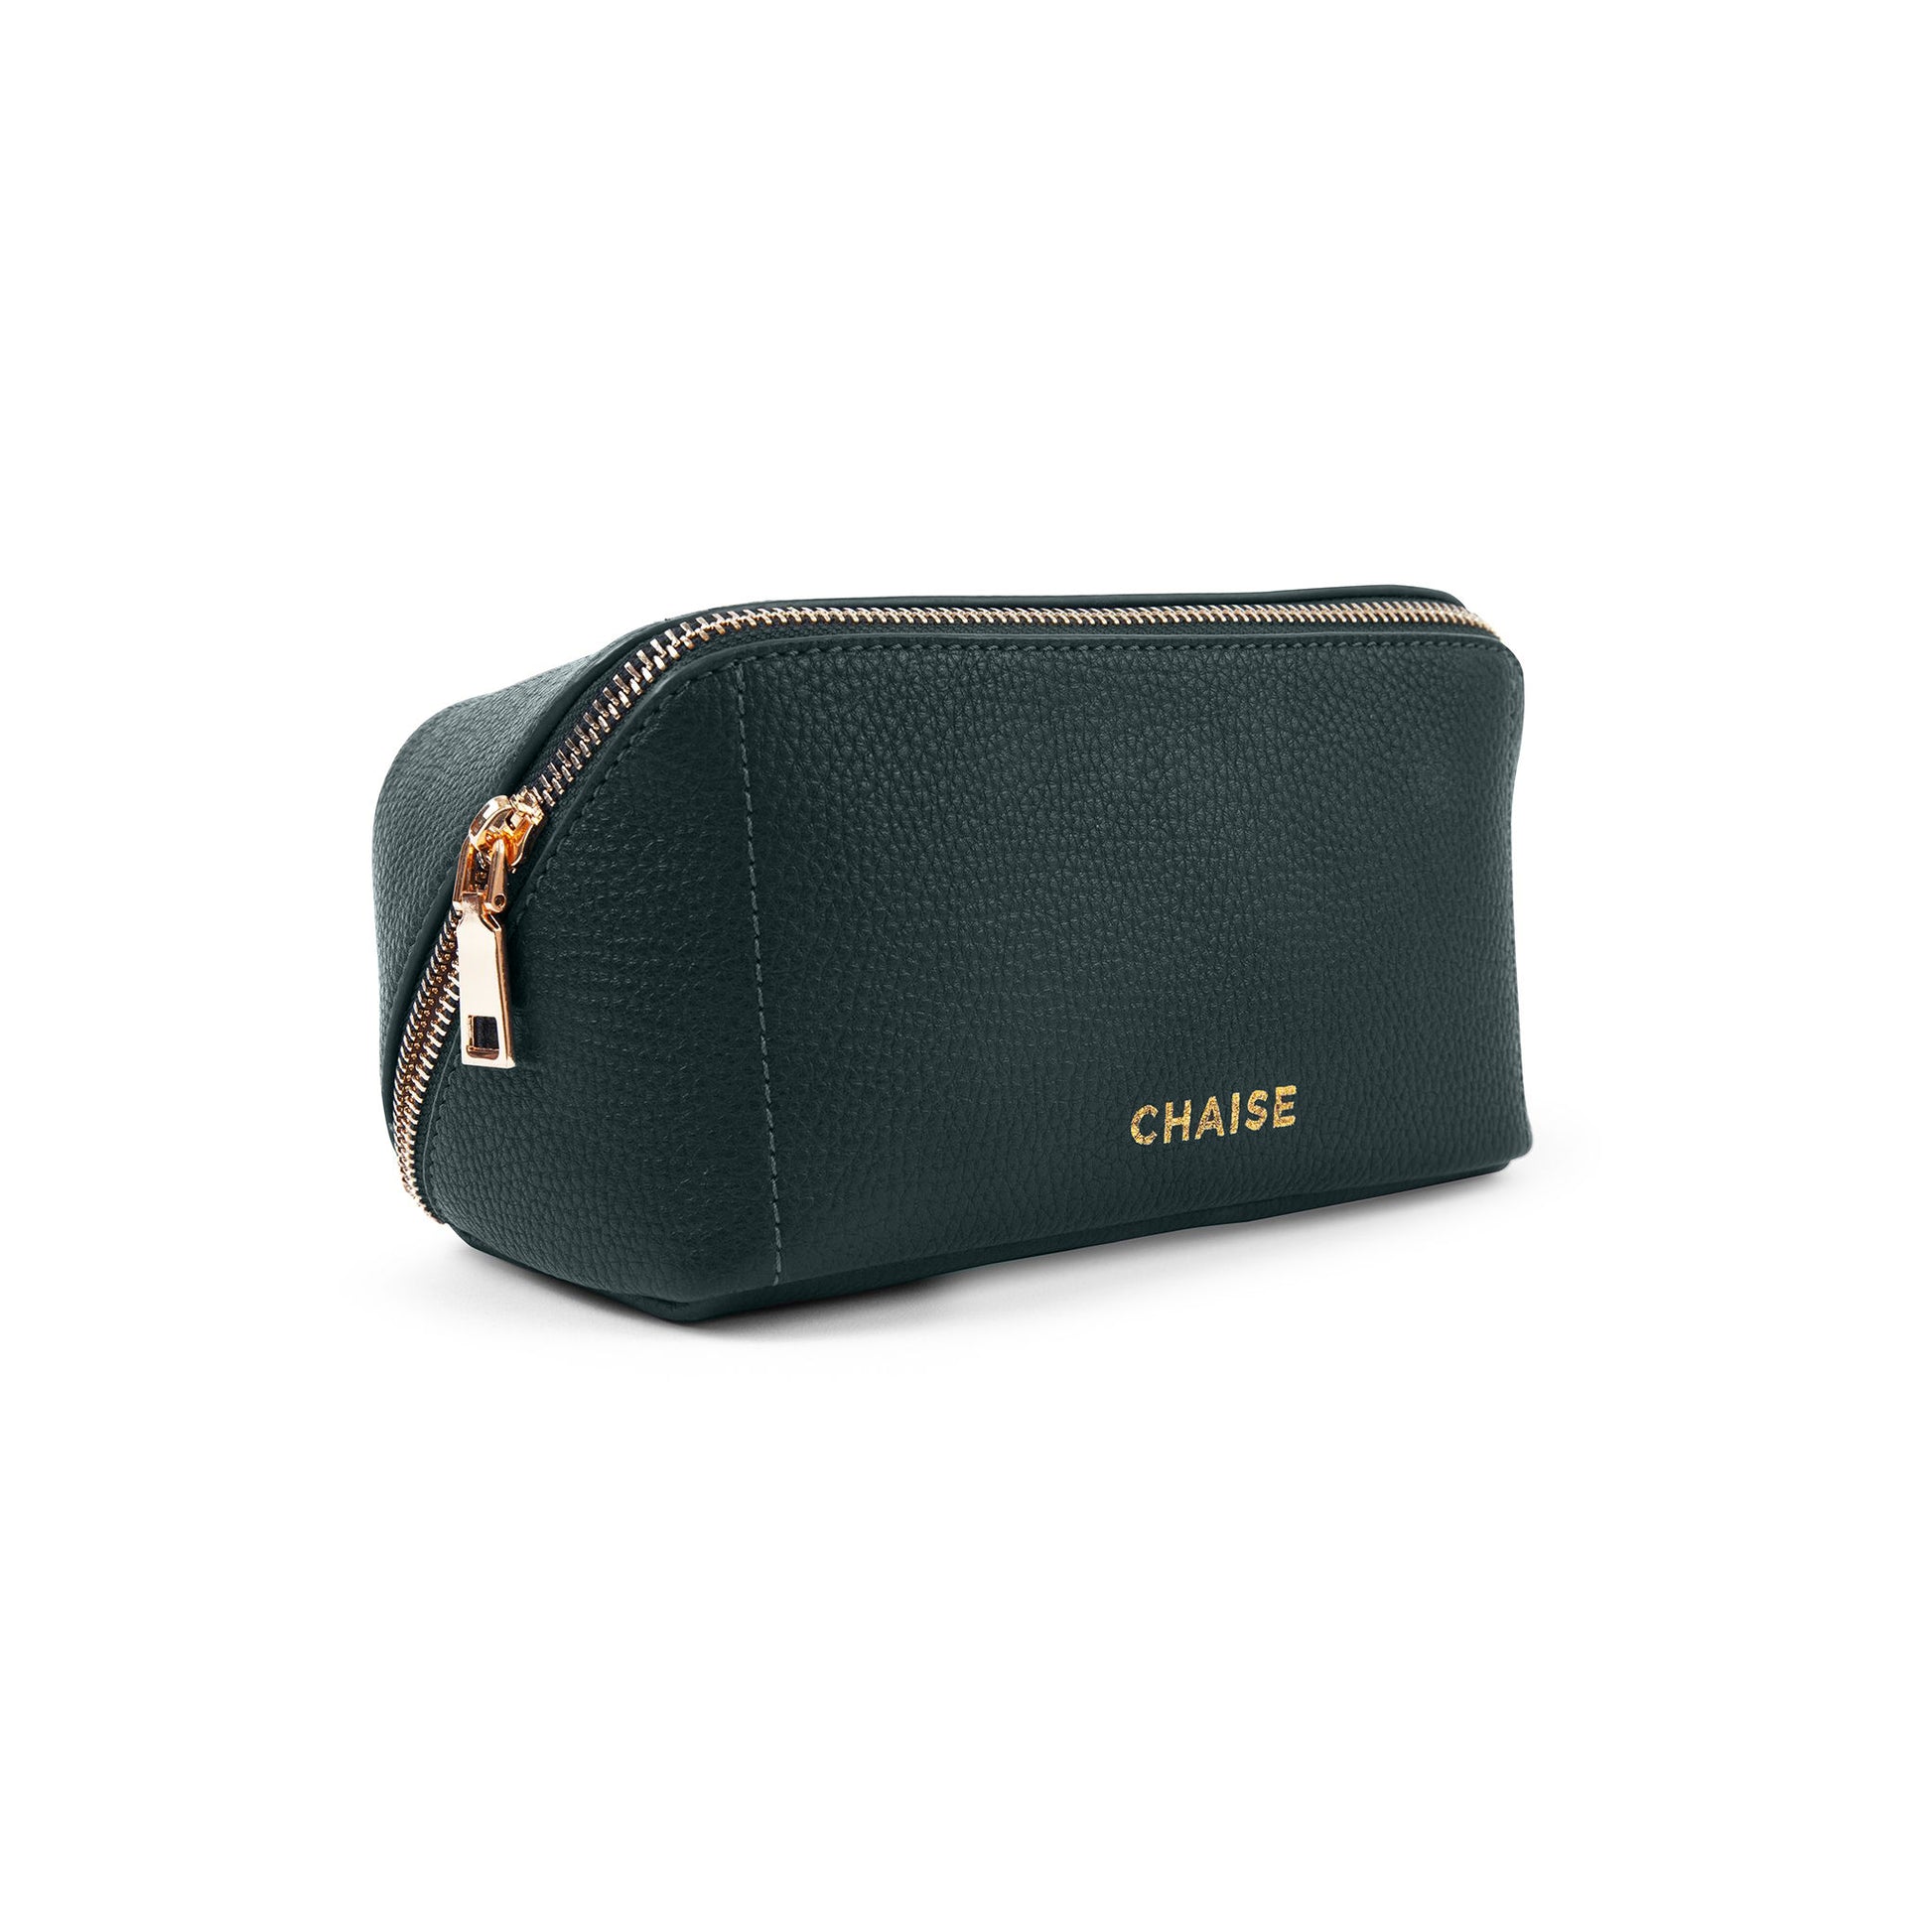 See It All Makeup Bag - Forest Dark Green – Chaise